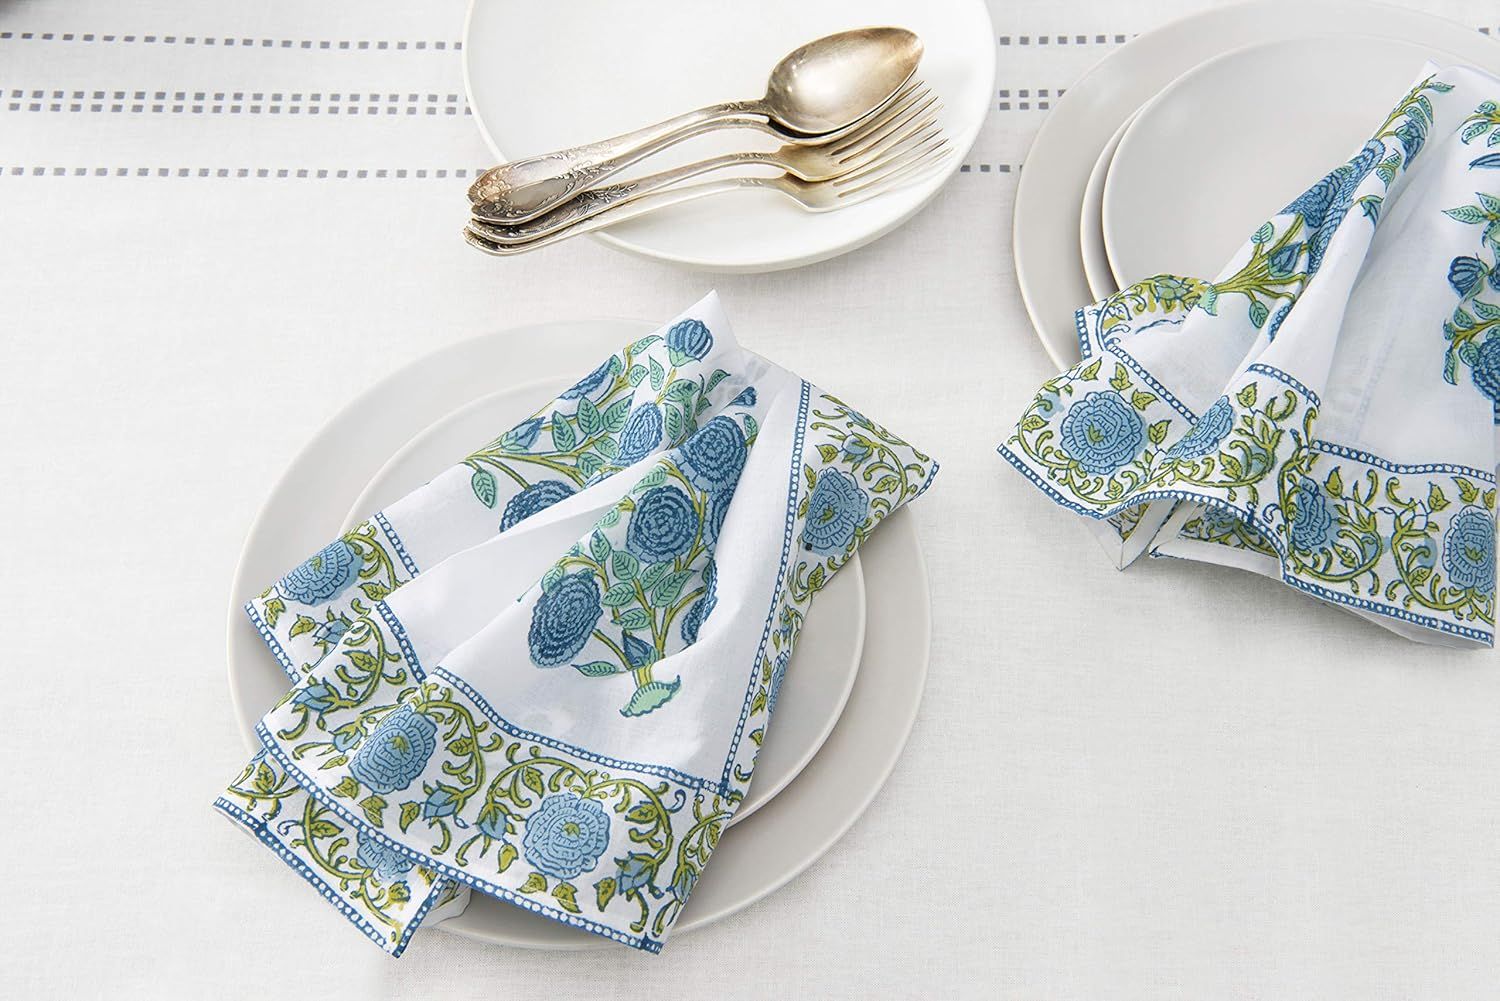 Avrit Cloth Dinner Napkins Soft Cotton Set of 4 Blue Block Printed Pieces |Washable| for Dinner, ... | Amazon (US)